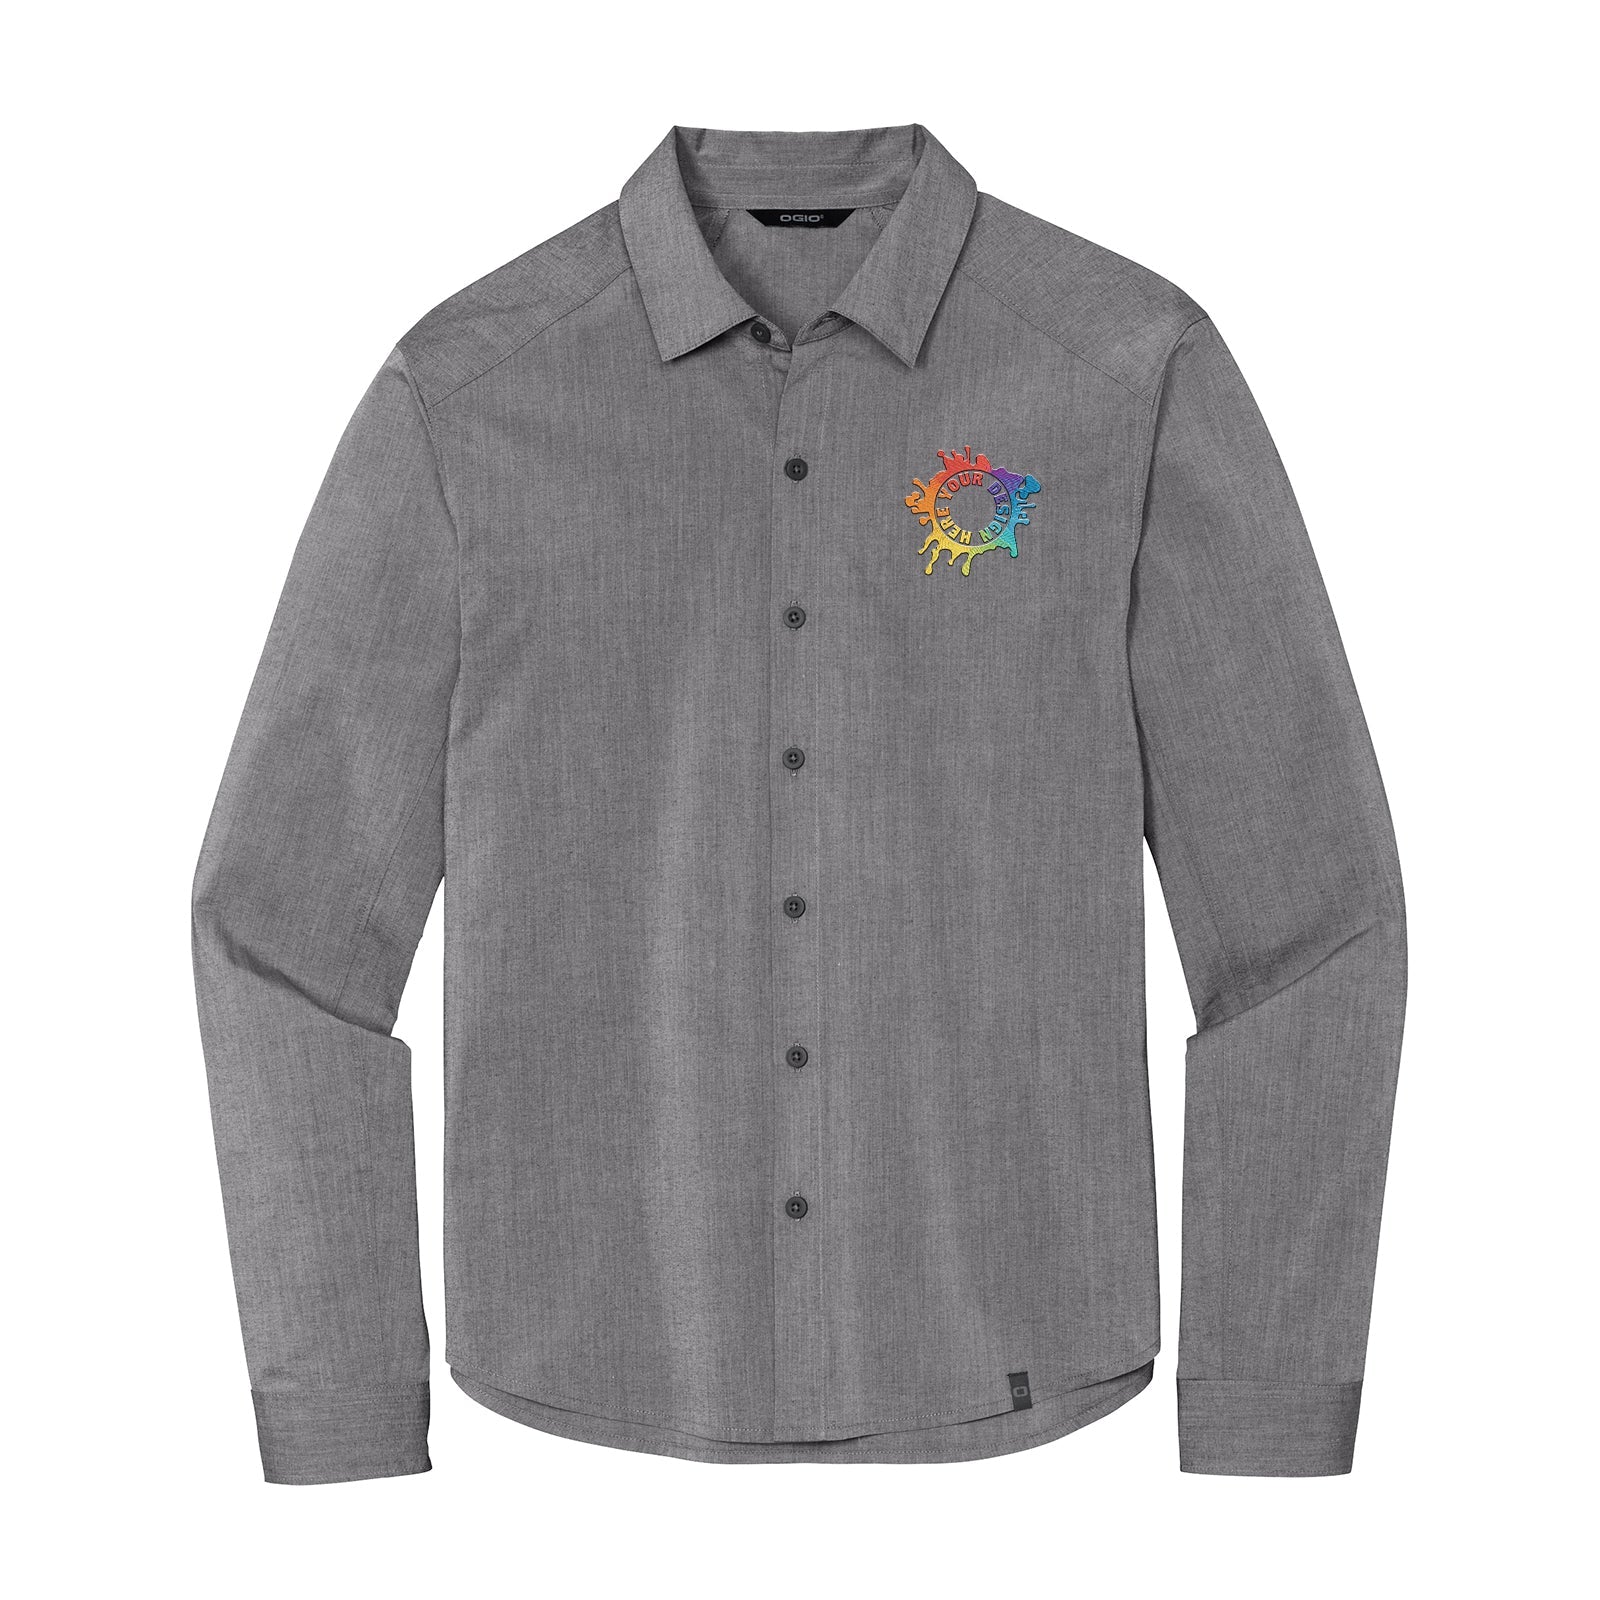 OGIO® Commuter Woven Shirt Embroidery - Mato & Hash